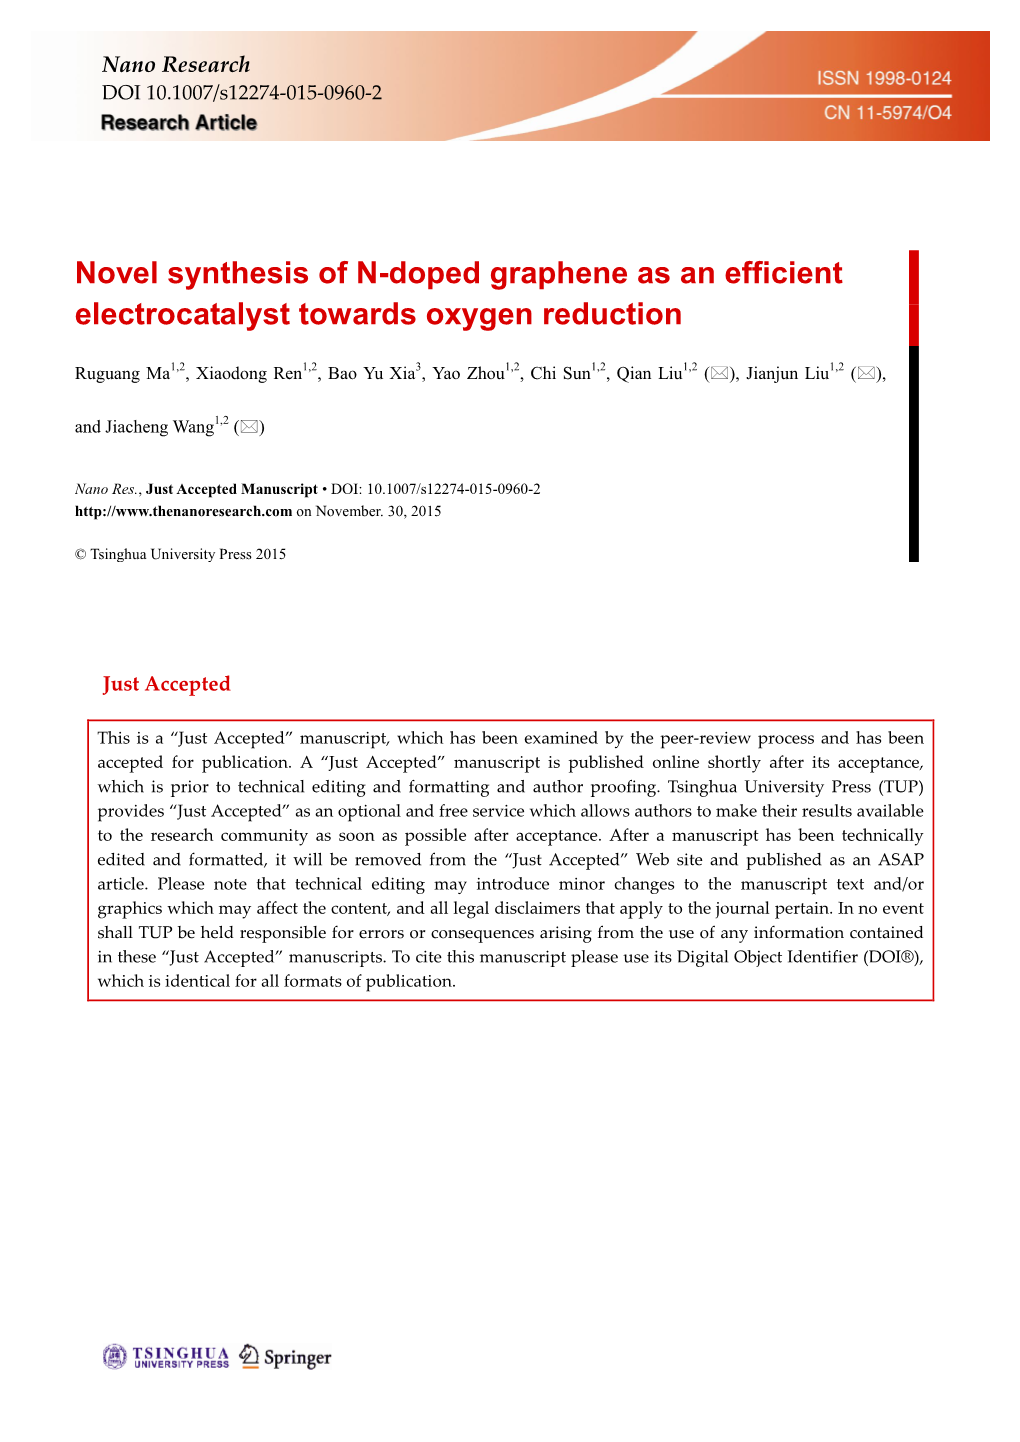 Novel Synthesis of N-Doped Graphene As an Efficient Electrocatalyst Towards Oxygen Reduction